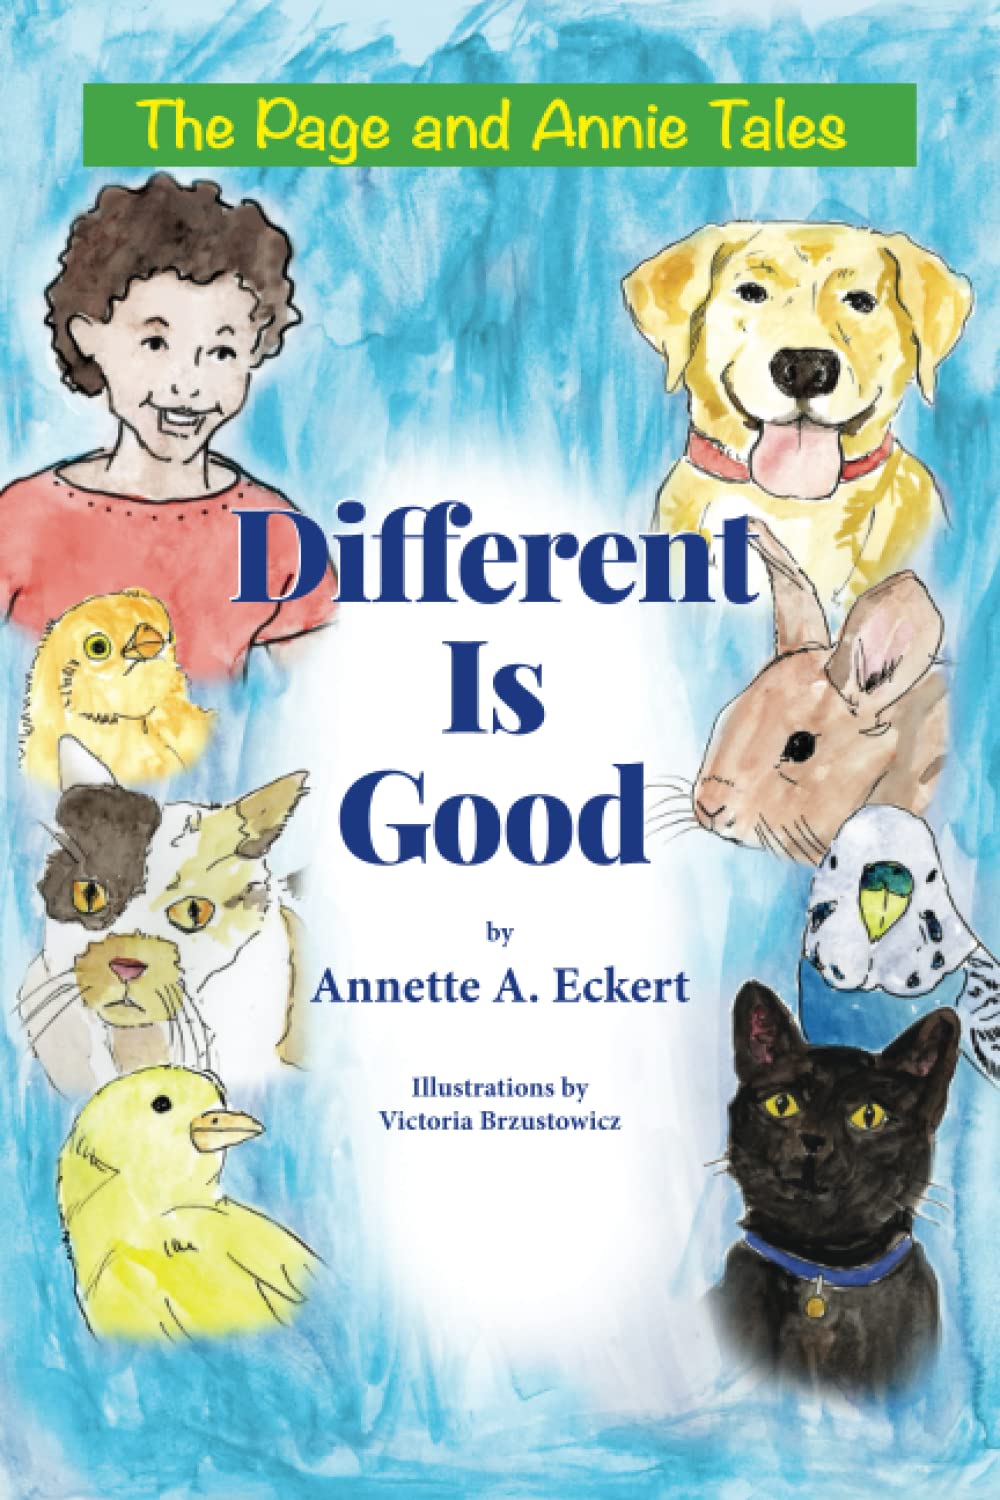 Annette A. Eckert ’73. The second story finds Page learning to get along with everyone who lives in Annie’s house.